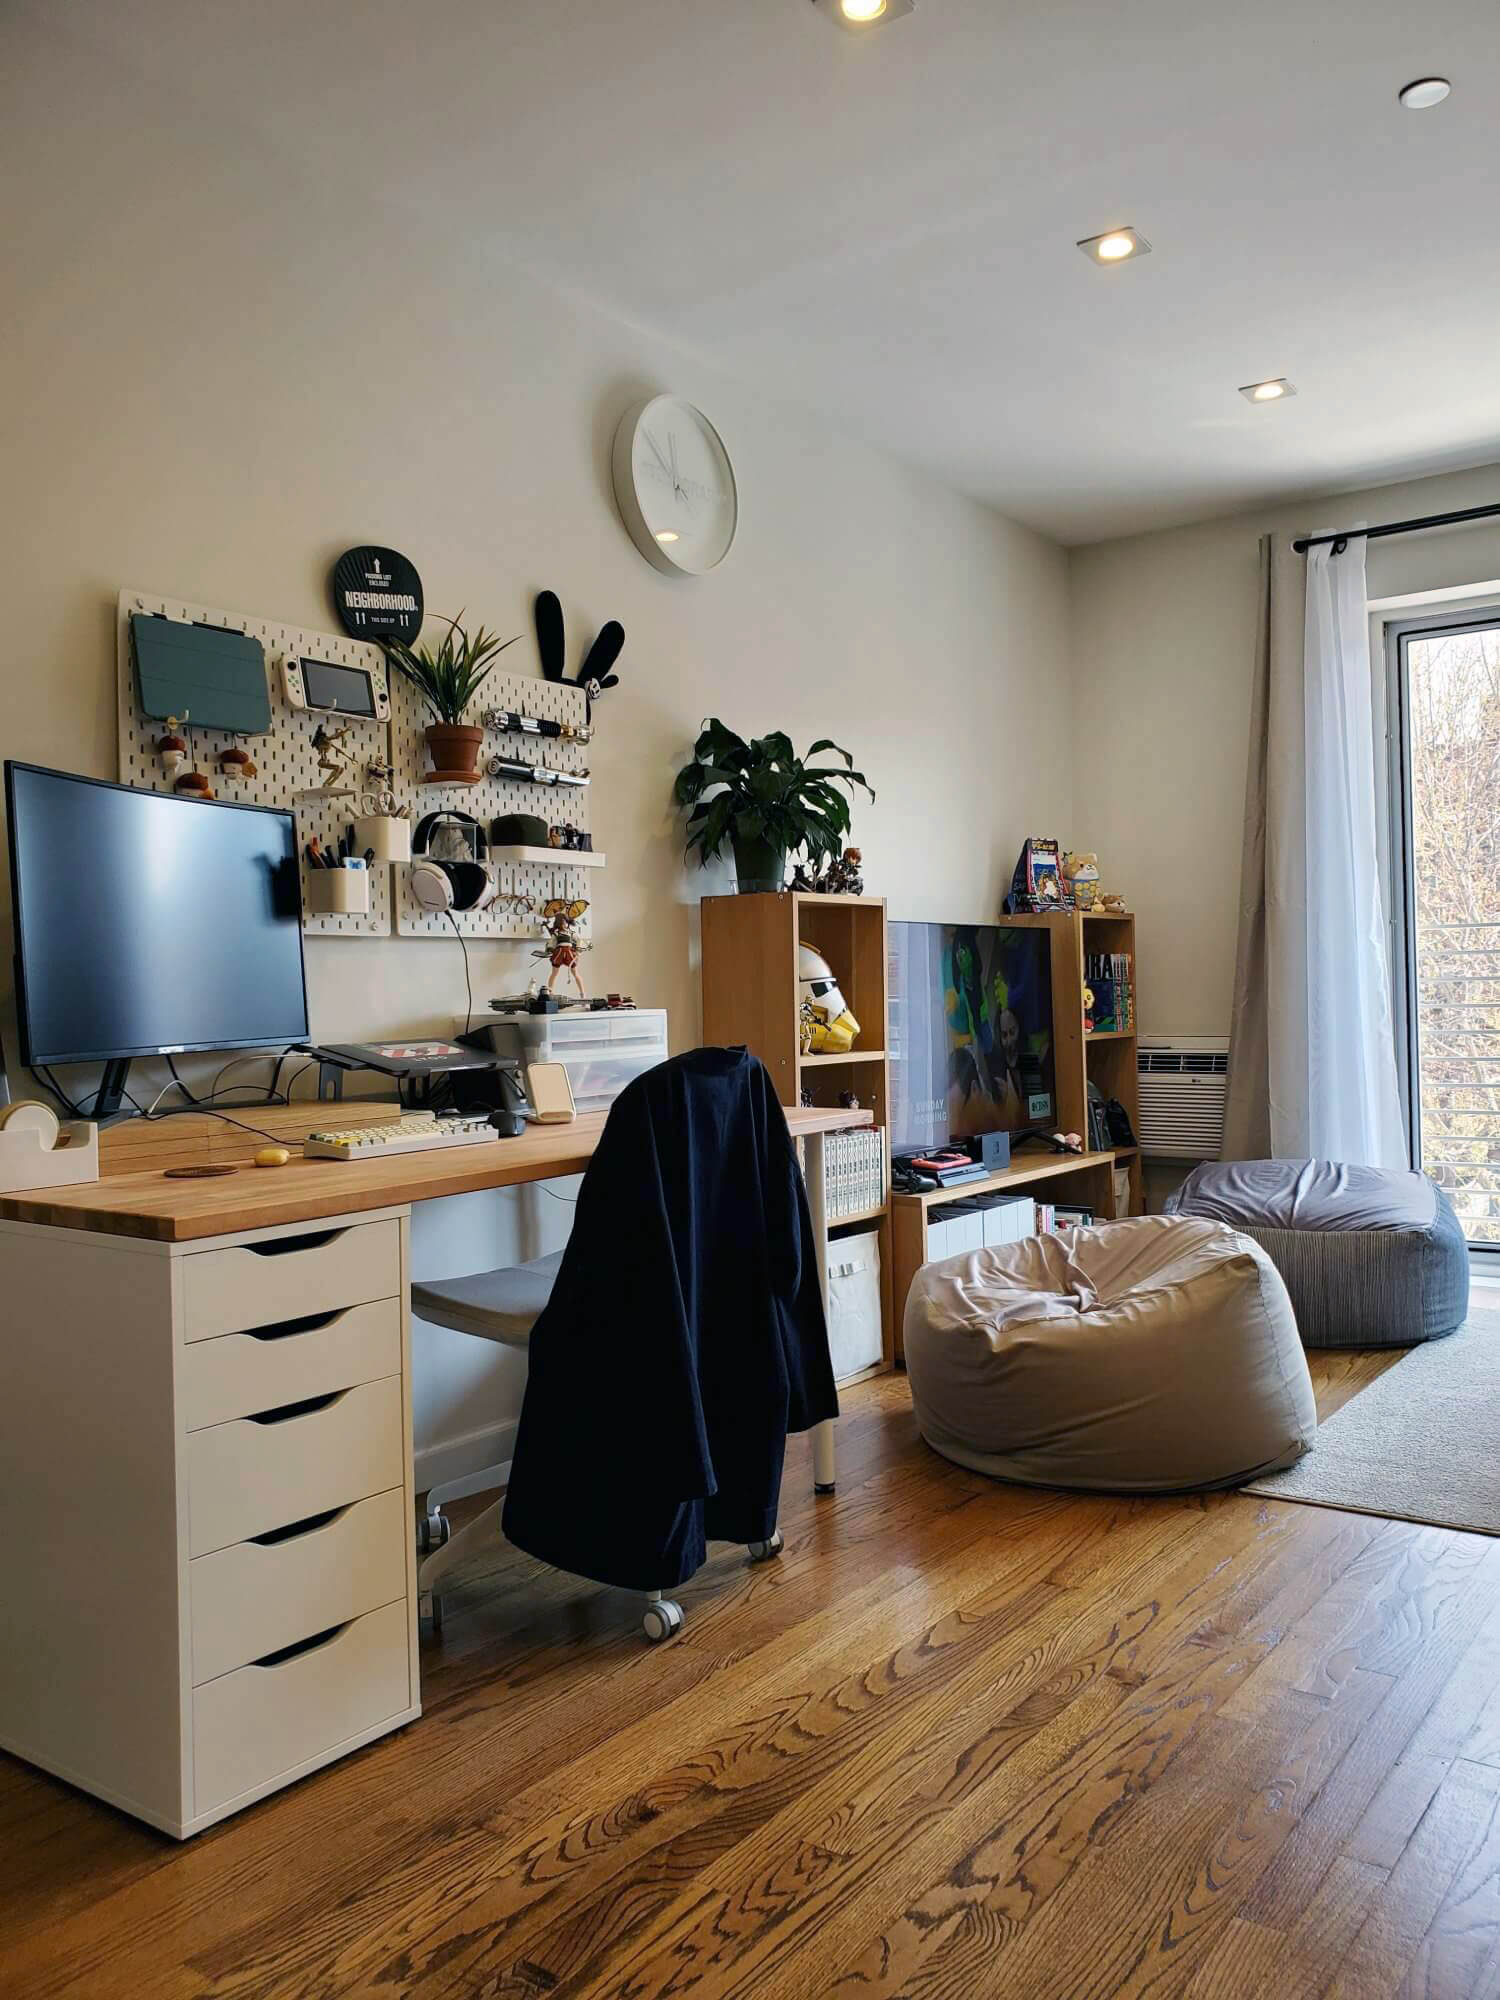 Ryoma’s home office benefits from a big window that lets in lots of natural light